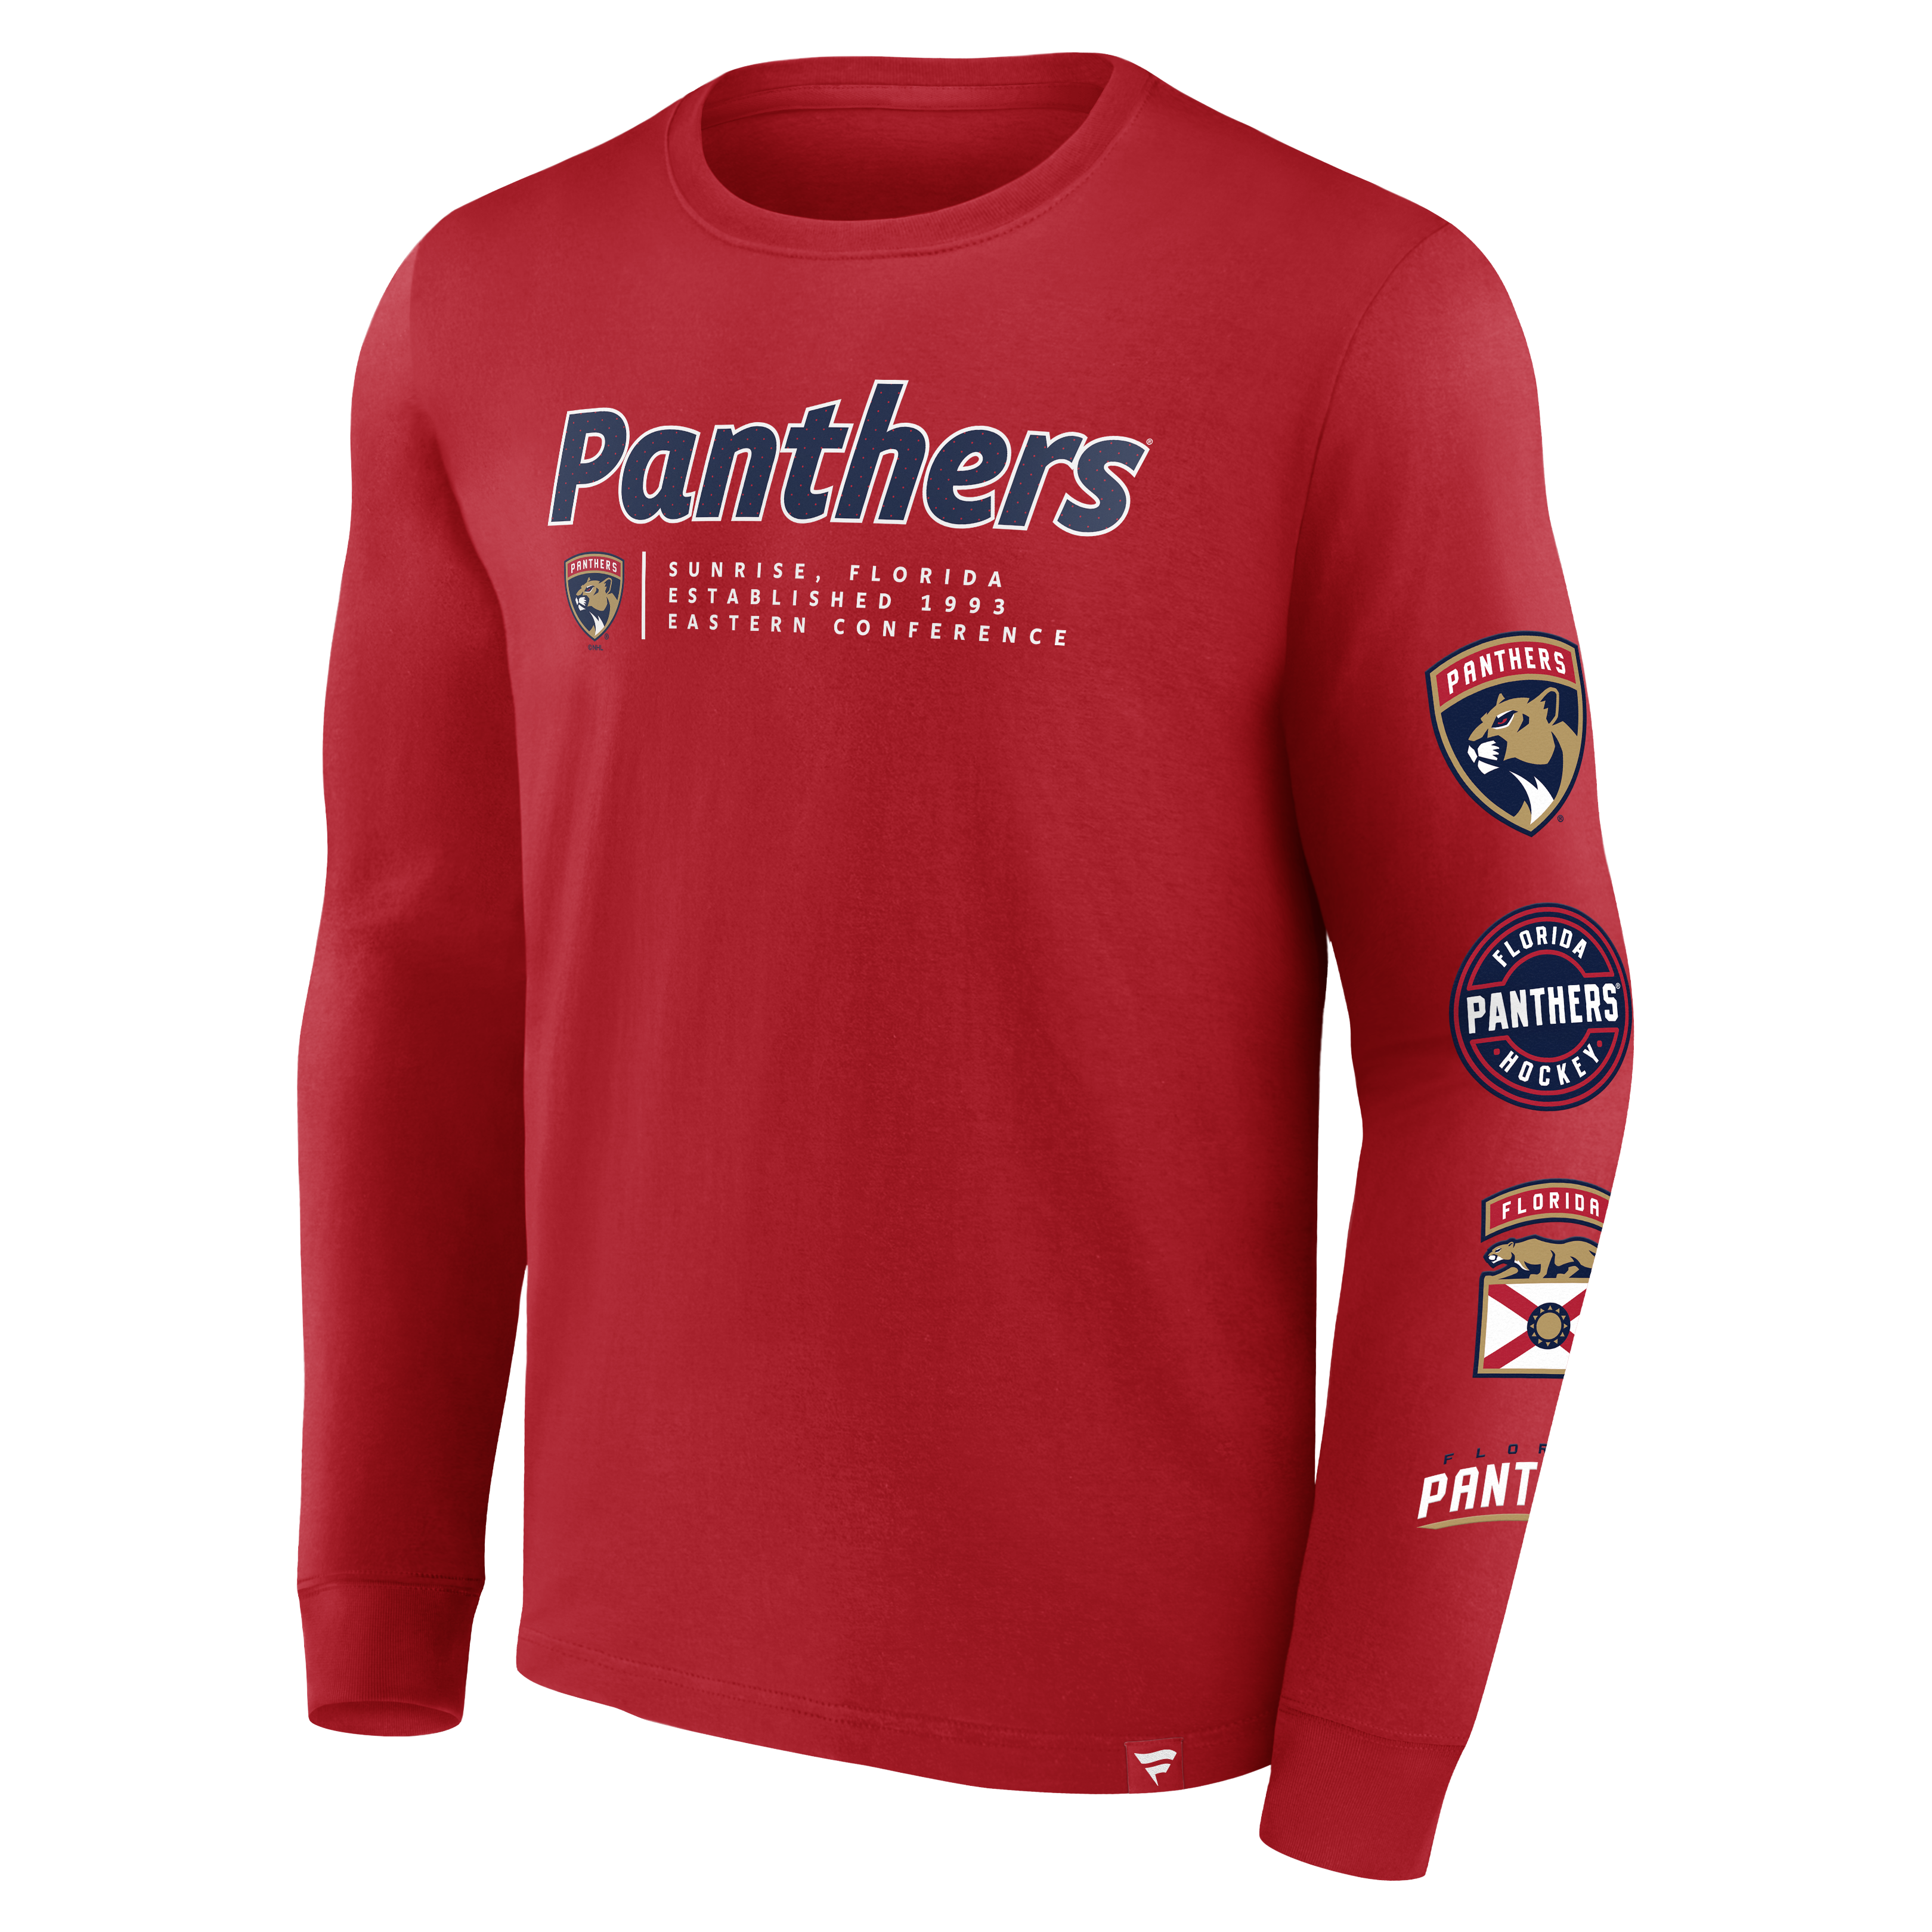 Florida Panthers Logo L/S Sleeve T-Shirt - Red